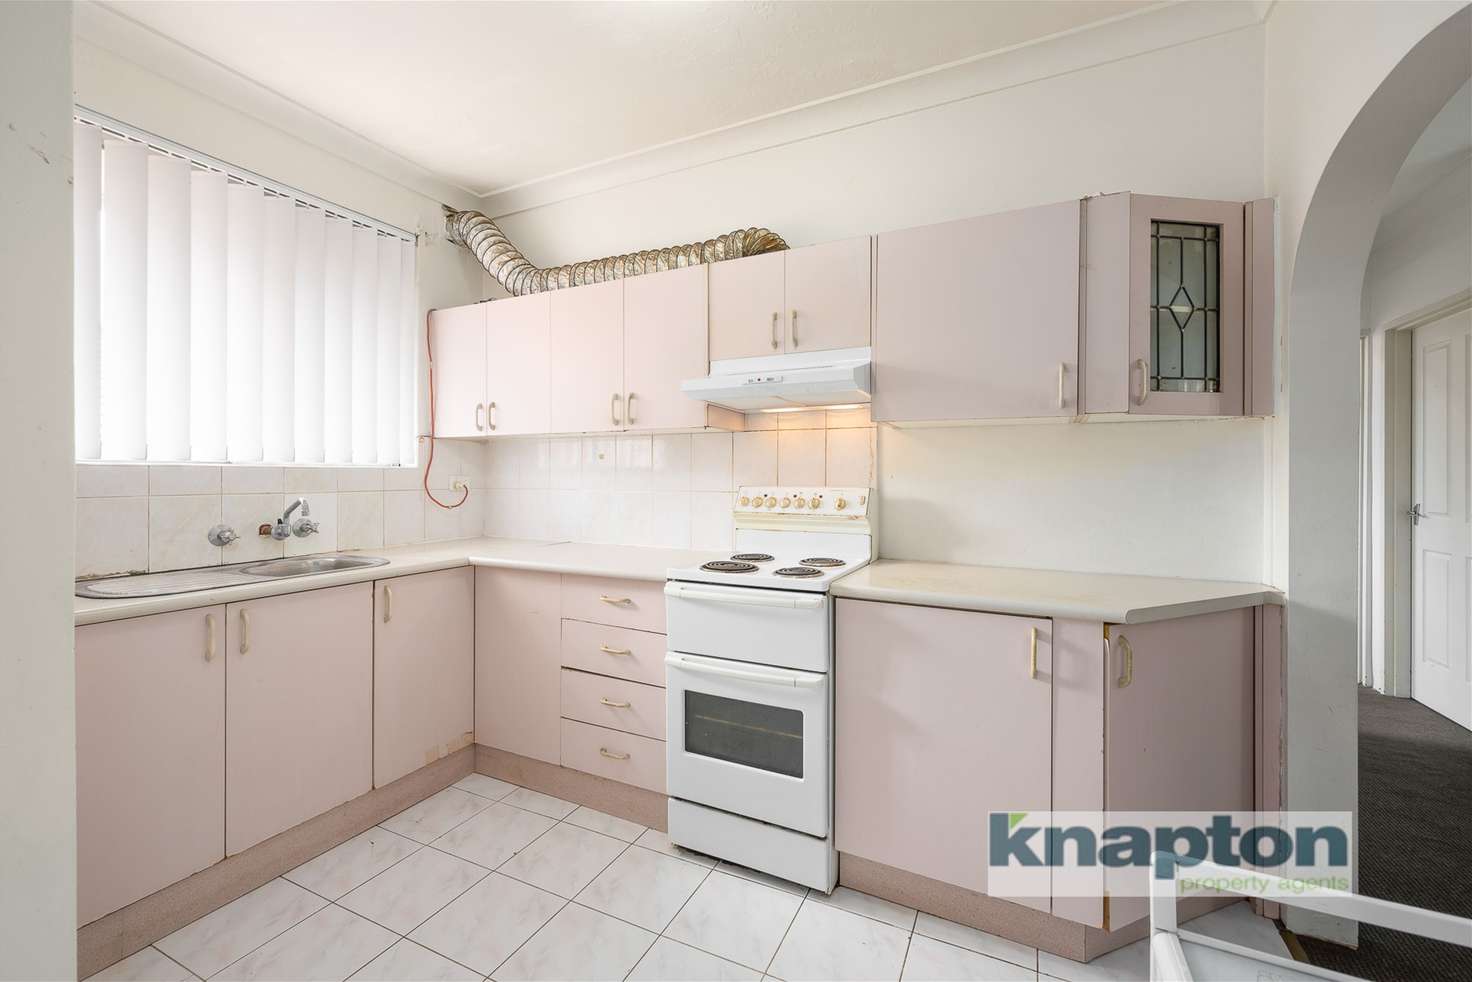 Main view of Homely unit listing, 9/70 Wangee Road, Lakemba NSW 2195